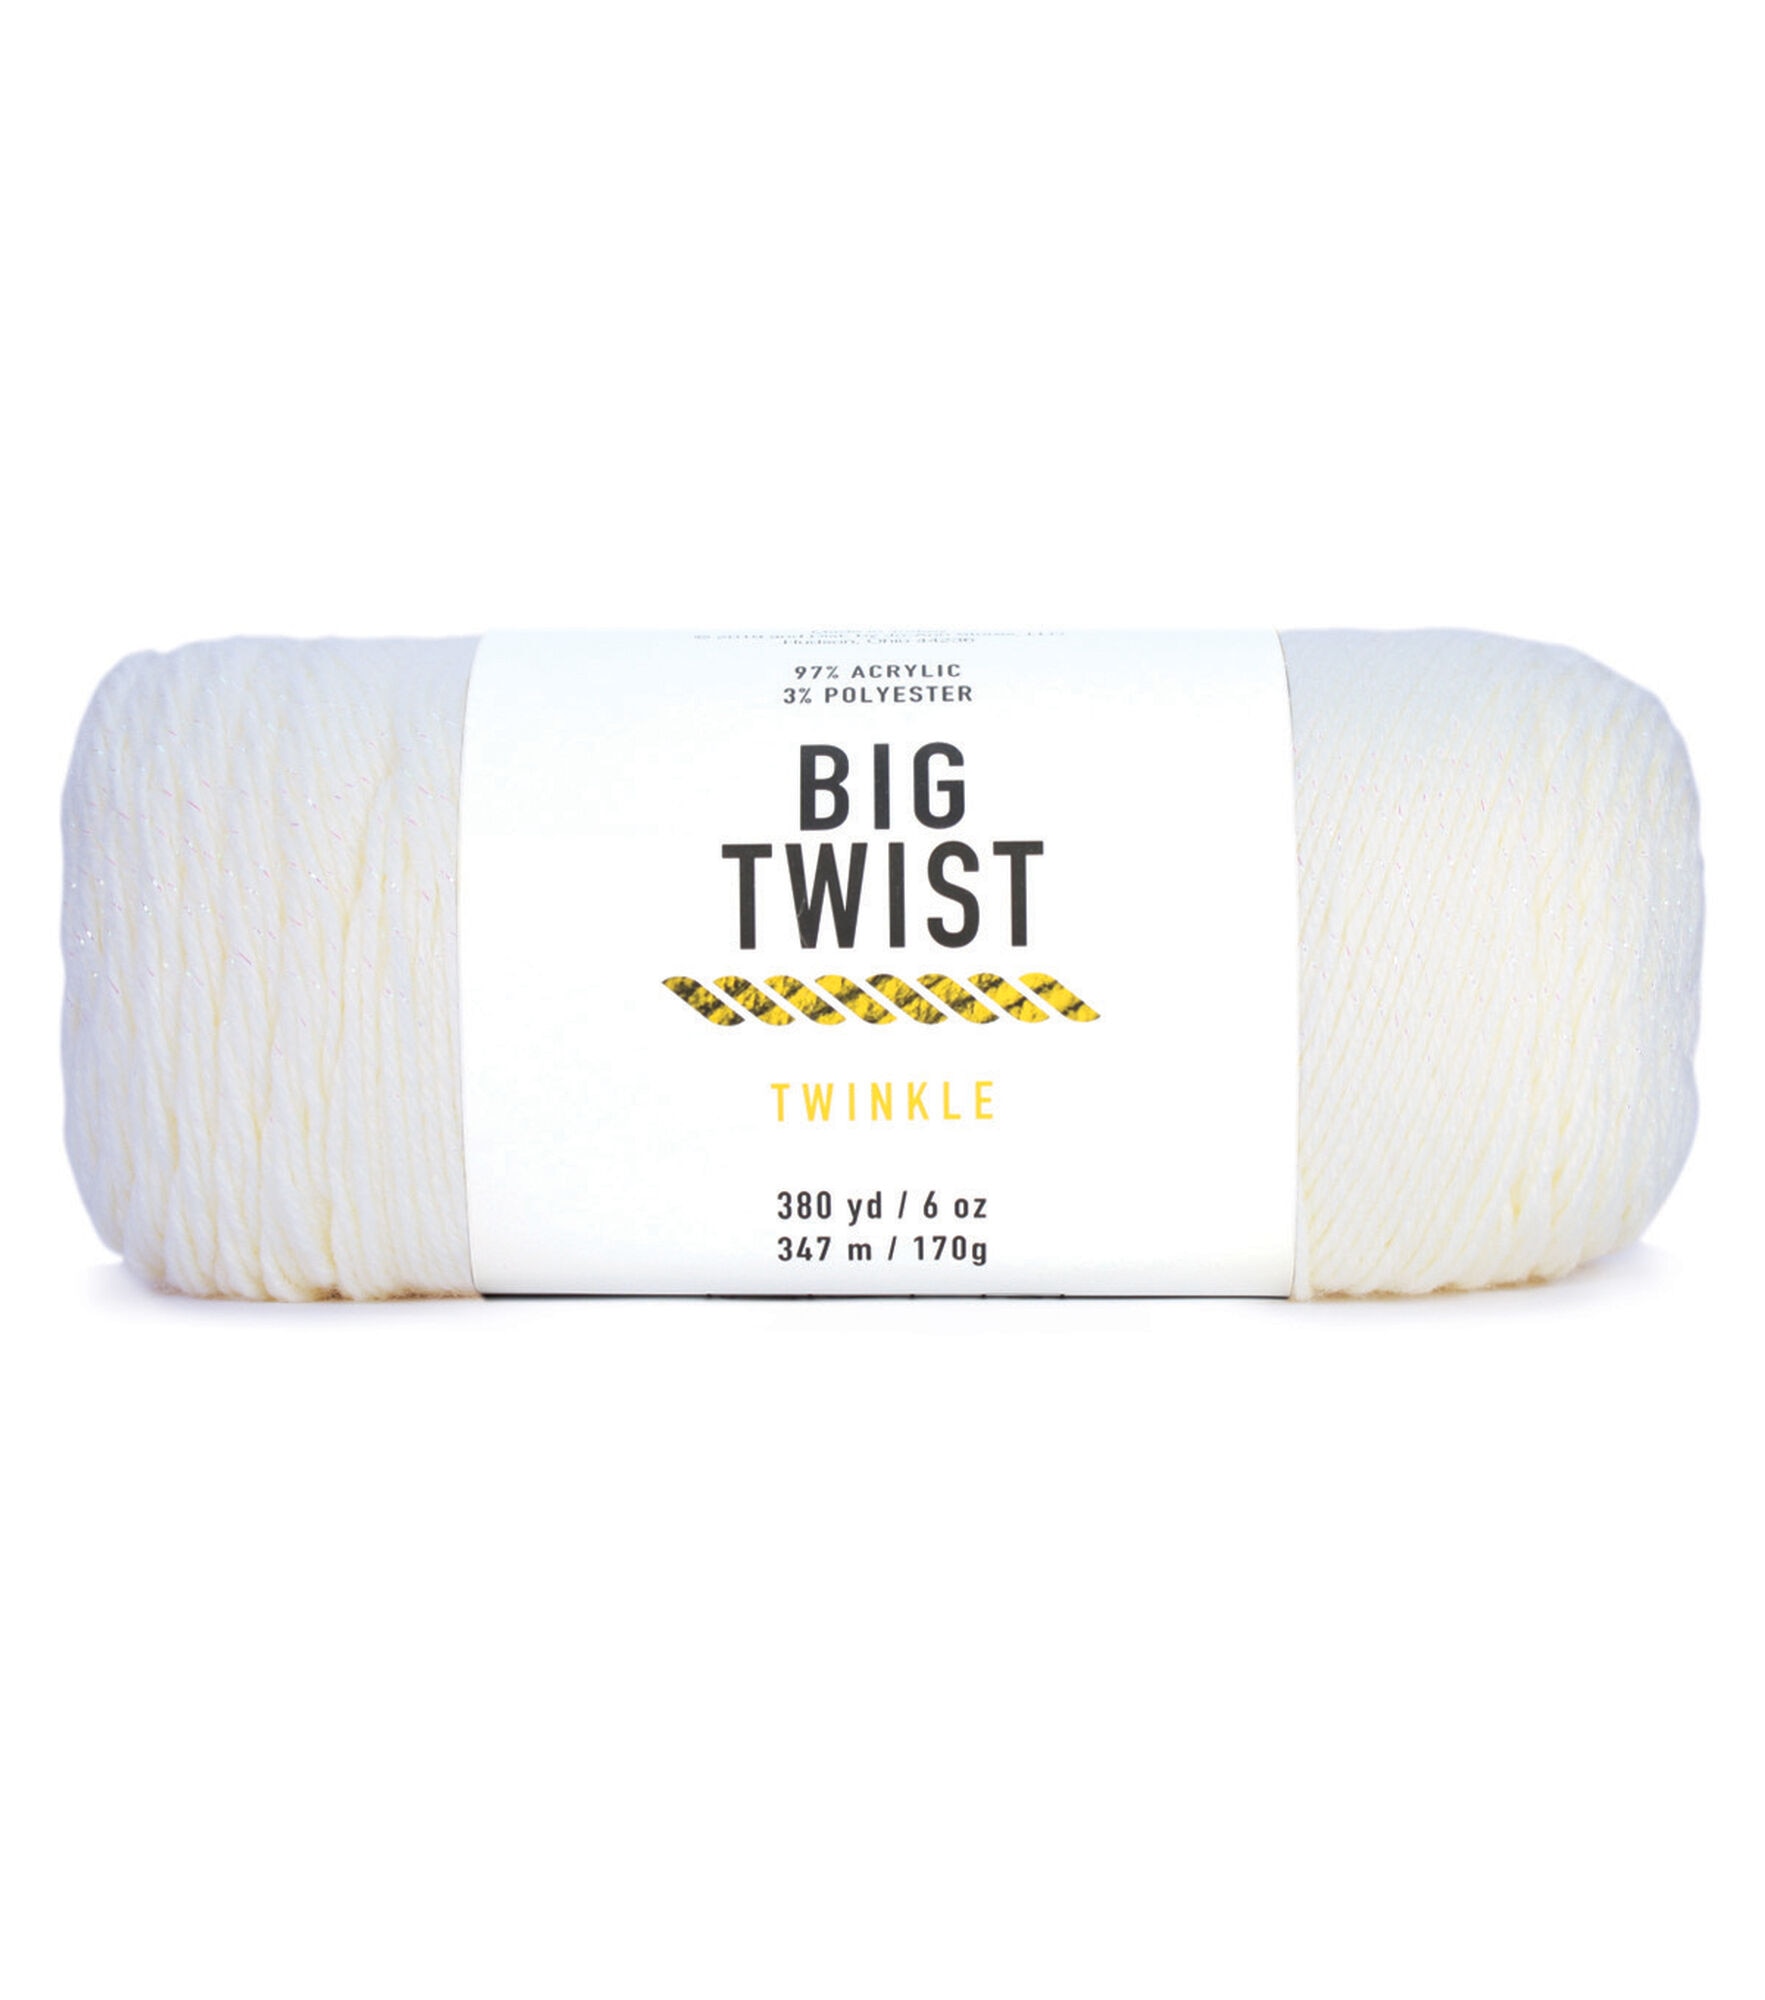 Twinkle 380yds Worsted Acrylic Blend Yarn by Big Twist, White, hi-res